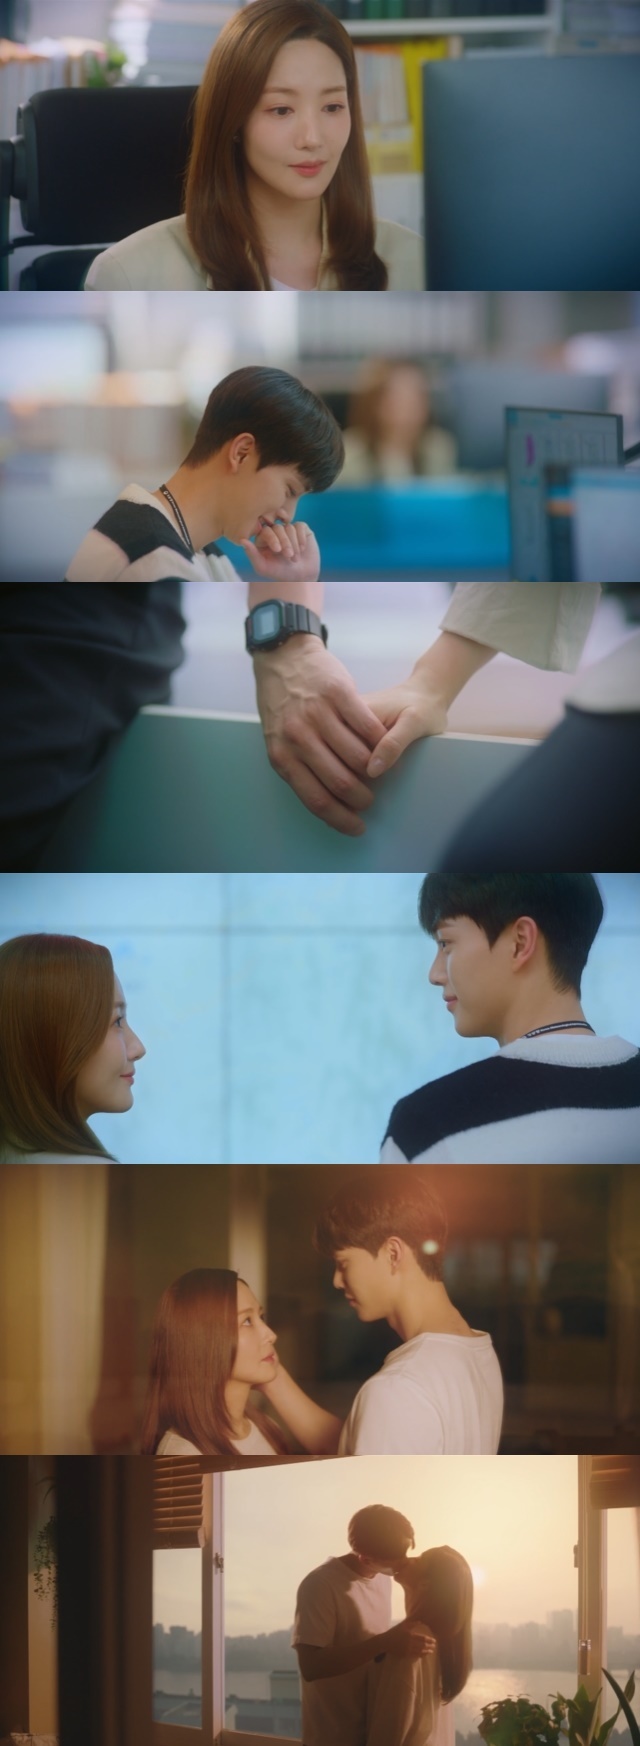 Park Min-young, who seemed to be craving Song Kang, was actually drawn to a sweet Reversal story that he was in a secret company relationship with him.In the fourth episode of the JTBC Saturday drama People in the Weather Service: In-house Love Cruelty (playplayed by Sunyoung Sun, directed by Cha Young-hoon), which aired on February 20, Lee Si-woos straight-line Confessions were drawn.On this day, Jin Ha-kyung said, If you like it, youre dating or youre not. Which one are we?I drew a line to Lee Si-woo asking, Just that far, my boss and subordinates in the Meteorological Administration. Jin Ha-kyung said that Lee Si-woo likes it, saying, Its just a passing feeling. He said he did not intend to have a love affair again.Jin Ha Kyung turned to Lee Si-woo, who was shaking at me, apologizing to Im sorry to hear it.The next day, Jin Ha-kyung, who rushed to work due to a major collision caused by the thick Fog, found Lee Si-woo, surrounded by his colleagues from the morning.Among his colleagues, especially Kim Soo-jin (Chae Seo-eun) asked Lee Si-woo who was with him at Hopes house last night and asked, I saw you sneak out the back door when we came.The embarrassed Jin Ha Kyung deliberately stopped their conversation with Lee Si-woo, and when this situation was repeated, the staff thought Lee Si-woo was taken by Jin Ha Kyung.On the other hand, Jin Ha-kyung was confronted with Chae Yoo-jin (Yura Boon) due to the issue of The Fog special. Chae Yoo-jin was instructed by his boss and said, Why does not the Korea Meteorological Administration do The Fog special?The Ministry of Land, Transport and Maritime Affairs incompetent Confessions! I wrote a short and distorted article that said it was the budget that I could not get a special report.Jin Ha-kyung, who had interviewed Chae Yoo-jin, was in a difficult situation, excluding personal feelings intertwined with Han Ki-jun (Yoon Bak), and Jin Ha-kyung was angry at Chae Yoo-jins behavior, which sent out articles without checking the facts without reading a passage of the paper.Jin Ha-kyung immediately chased Chae Yoo-jin and argued.Jinha went straight into the night writing a new report, and Jinha called Lee Si-woo every five minutes to help analyze the data.Lee Si-woo responded to Jin Ha Kyungs demands even in a tired situation, and suddenly Jin Ha Kyung came out of his home and came to the honeymoon house where he was staying.Jinha Kyung happily brought Lee Si-woo inside, and ate a night meal together and worked together.At the same time, Reversal story was released. Jin Ha-kyung, who seemed to turn around after hearing Lee Si-woos Confessions last night, said, I do not apologize.Im sorry I was caught by the manager. Im serious. He returned to Lee Si-woos sincere confessions and kissed first.They were in a secret company relationship all along.Jin Ha-kyung greeted the morning with Lee Si-woo.Jin Ha-kyung said he had decided to release a honeymoon home to Lee Si-woo, saying, I will continue to think about it, but I do not think there will be new memories on it.Lee Si-woo, who became a new memory mate of Jin Ha Kyung, looked at Jin Ha Kyung with his affectionate eyes, saying, I want to know everything from beginning to end about Jin Ha Kyung.